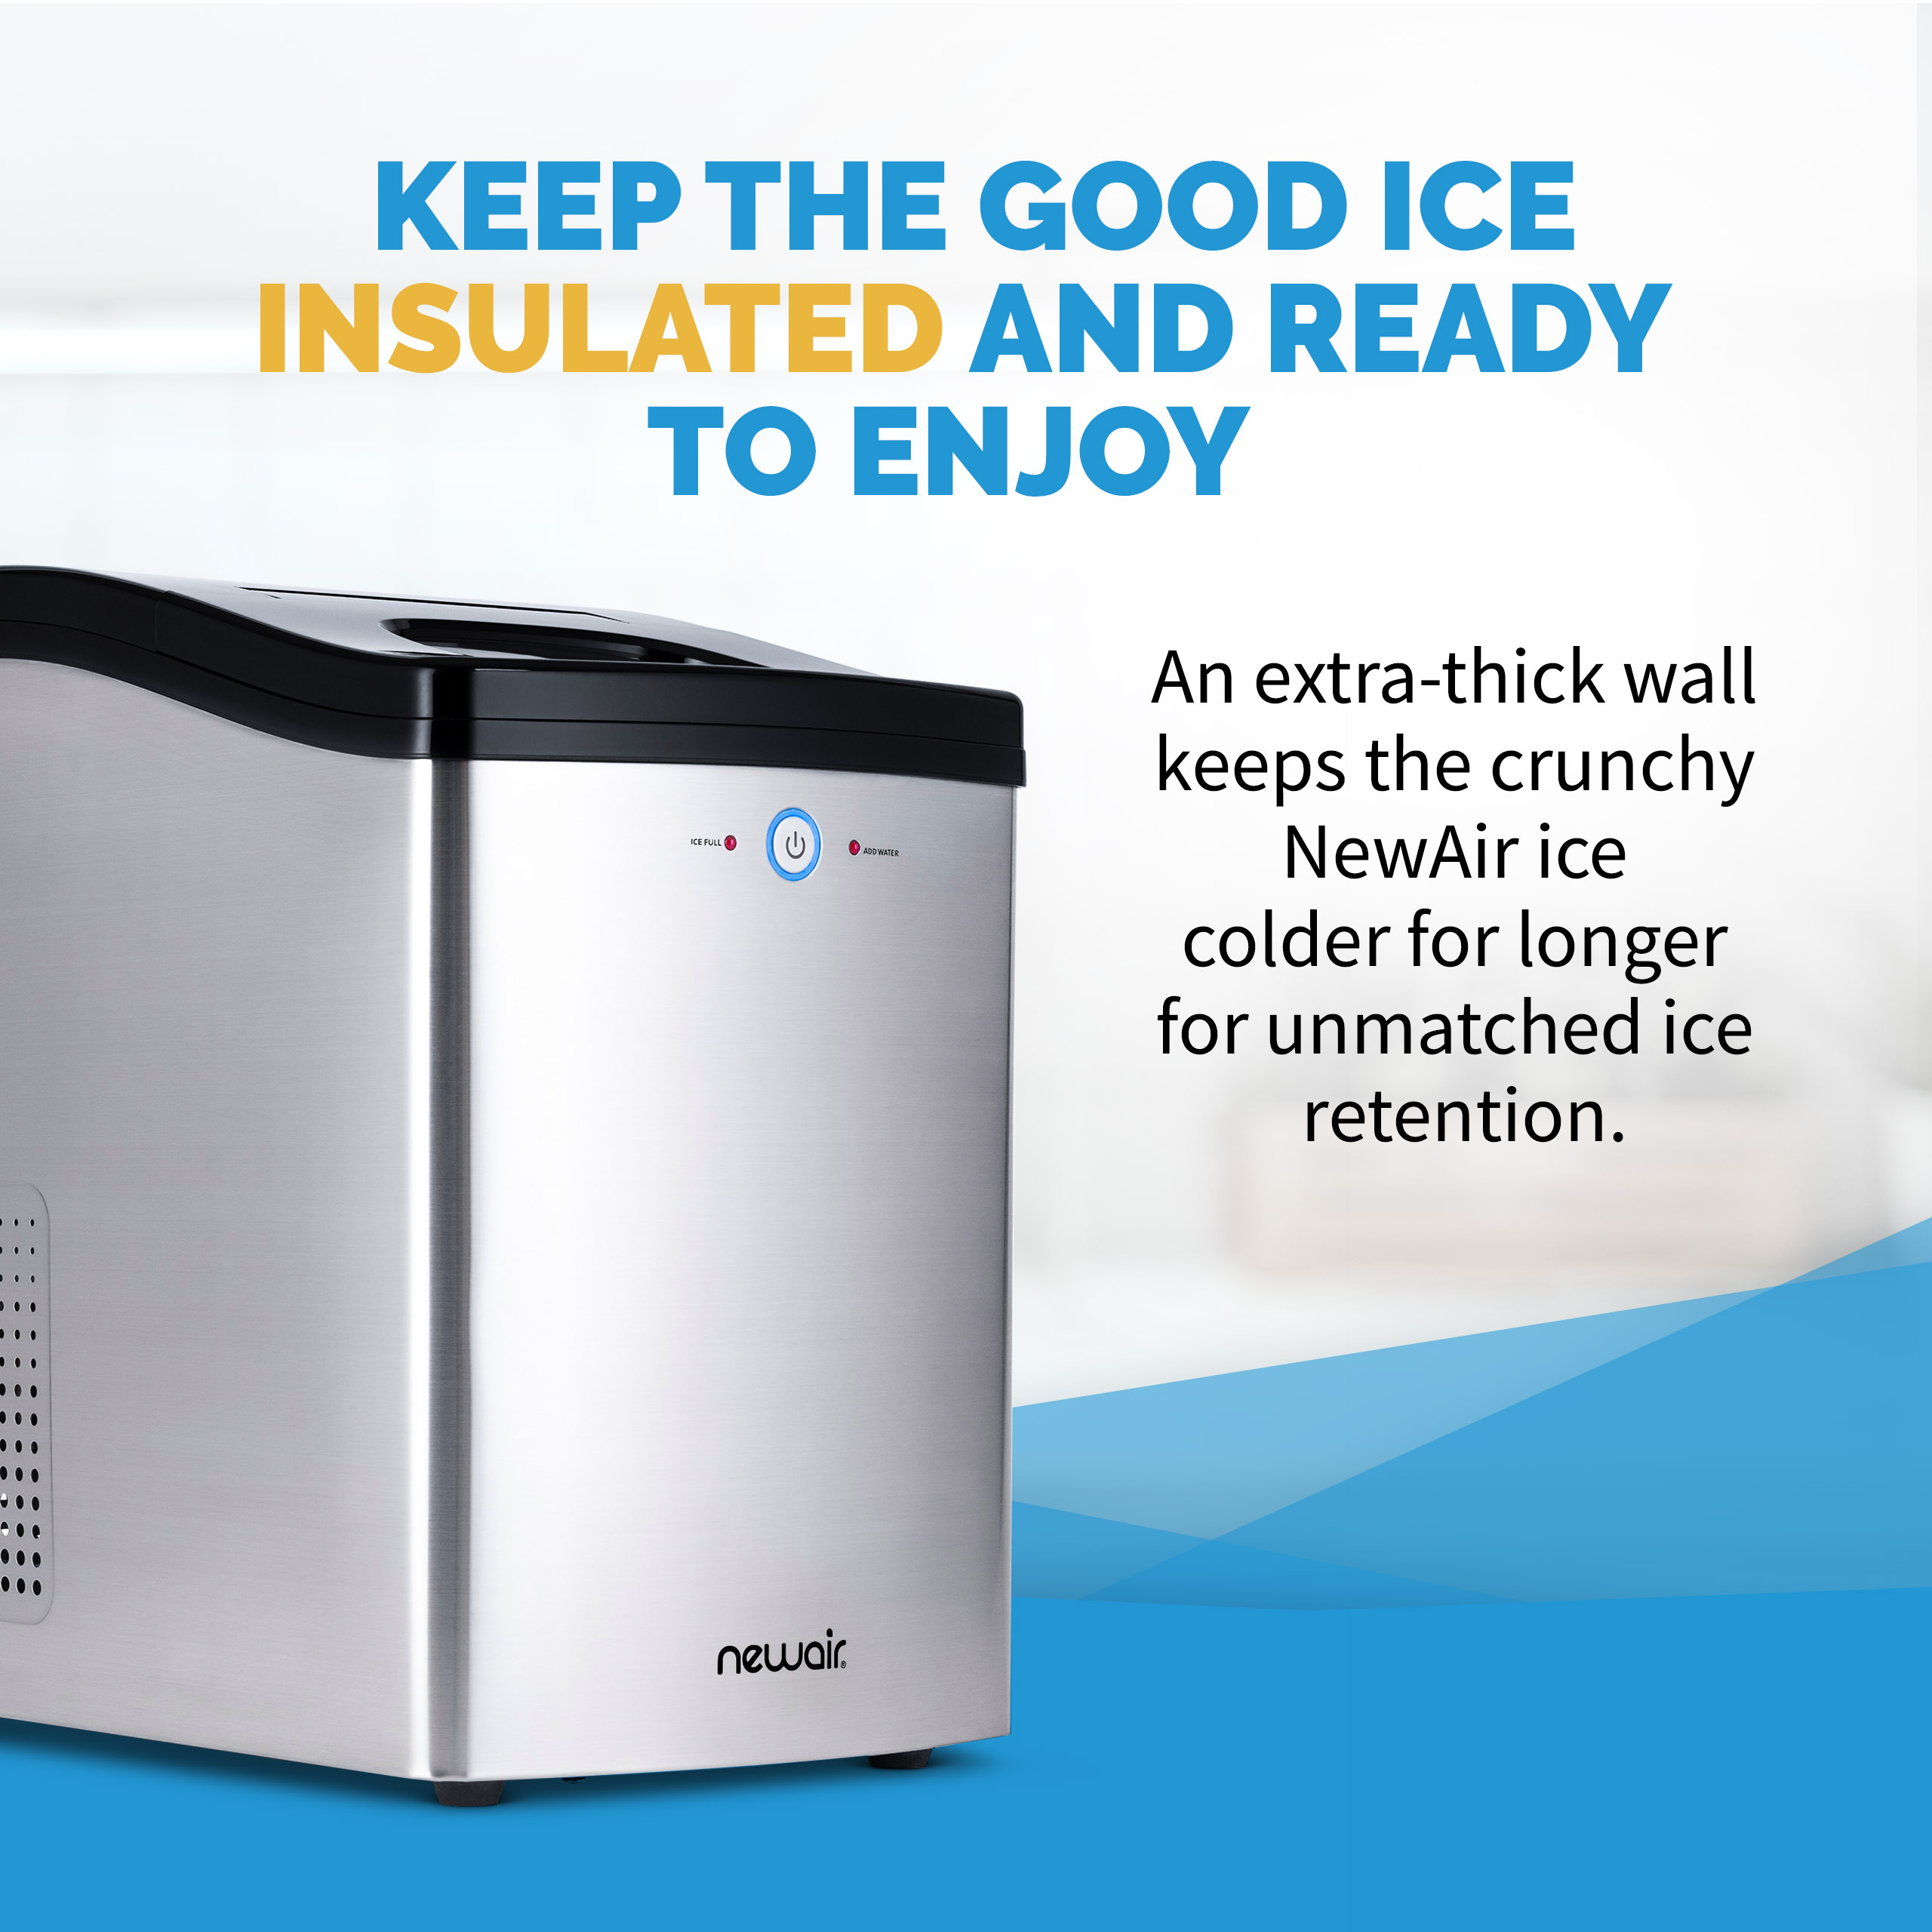 Newair 40 lb. Countertop Nugget Ice Maker in Stainless Steel - NIM040SS00 - image 5 of 16